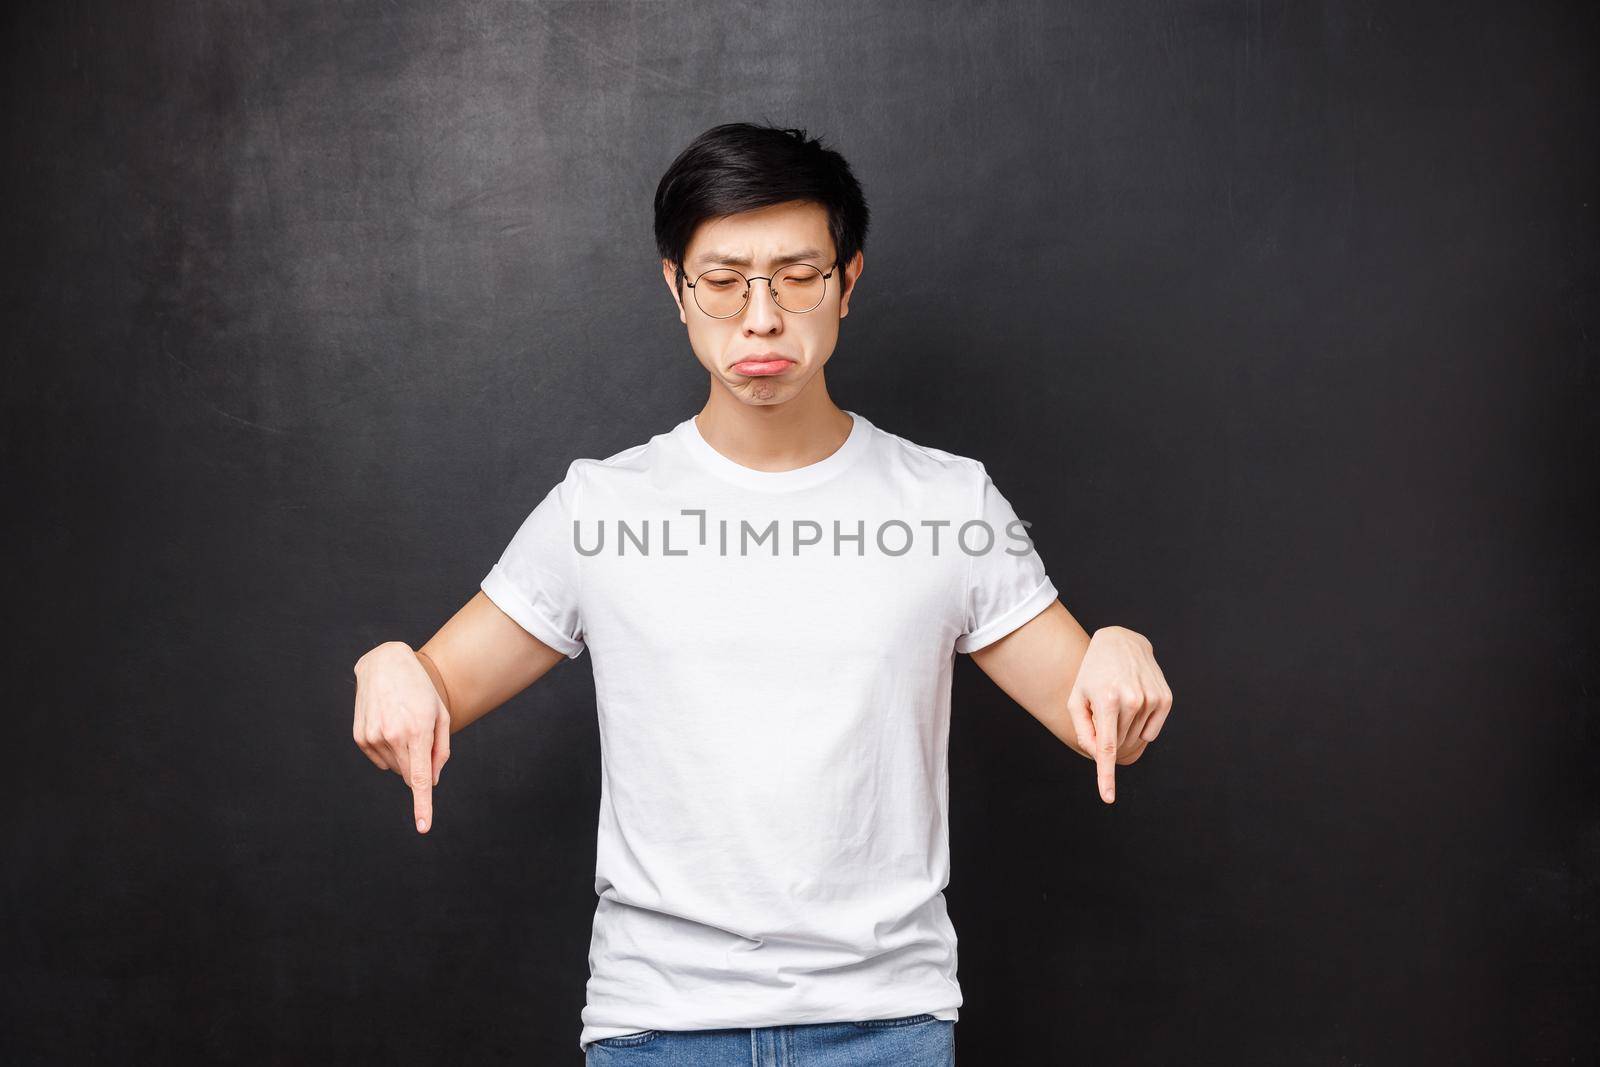 Whining and sobbing miserable upset asian guy feel gloomy, grimacing uneasy and distressed, looking pointing down, losing didnt won prize, regret of missed opportunity, black background.